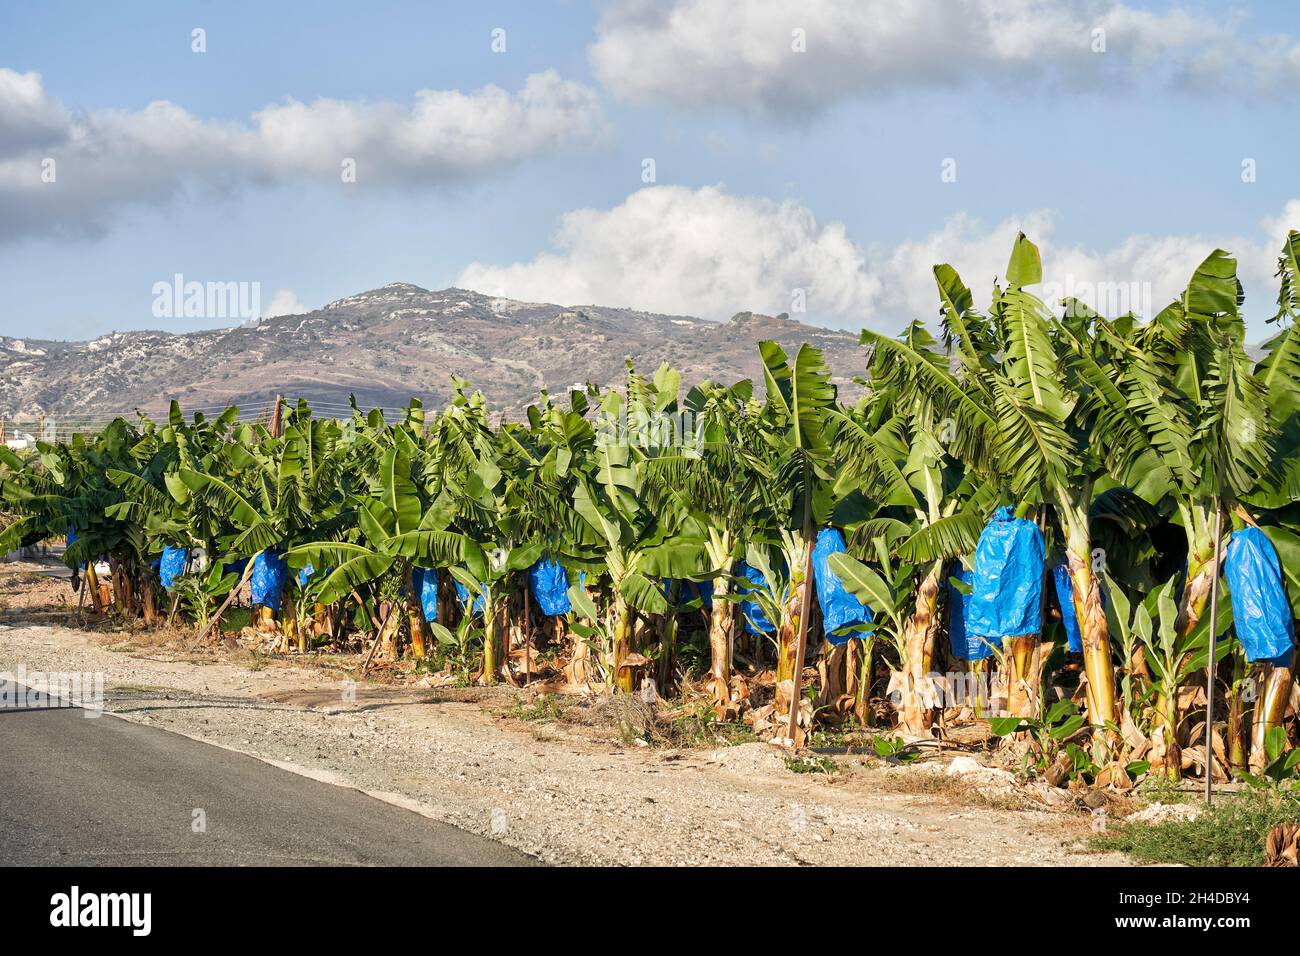 Panoramic photograph of a banana tree plantation in Cyprus with mountains in background Stock Photo